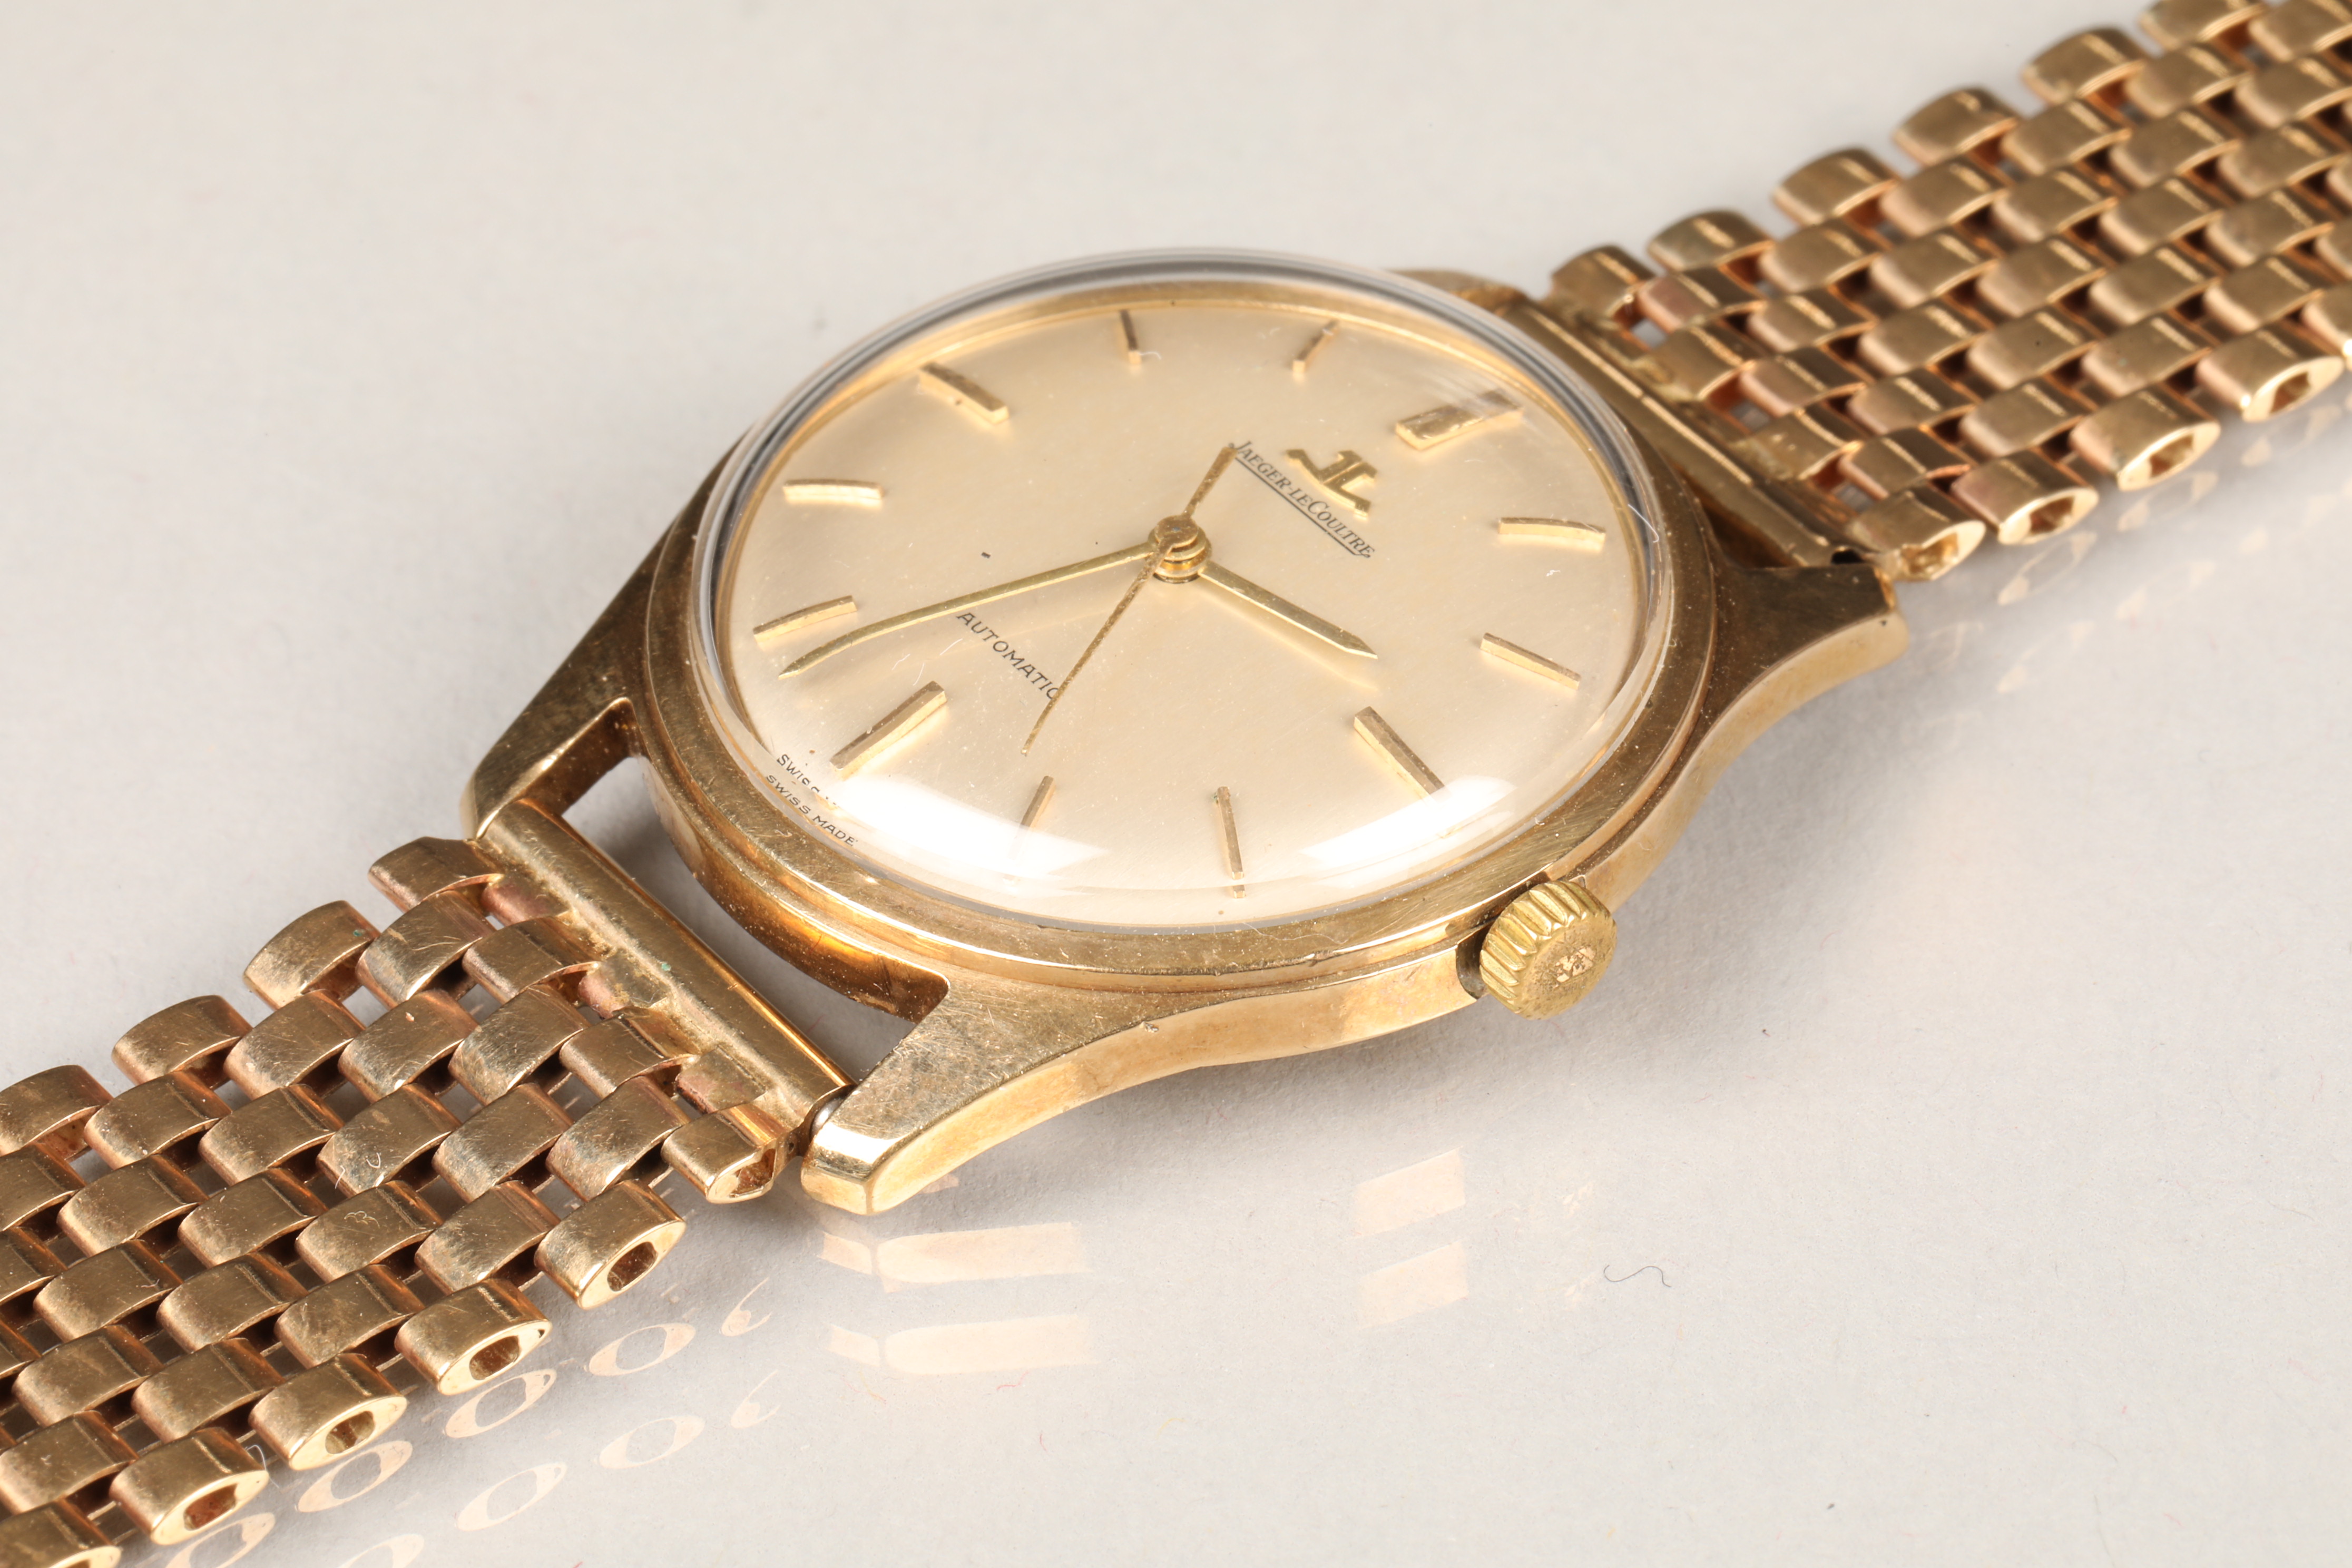 Gents 9 carat gold Jaeger-LeCoultre wristwatch, champagne dial with gilt baton hour markers, - Image 4 of 12